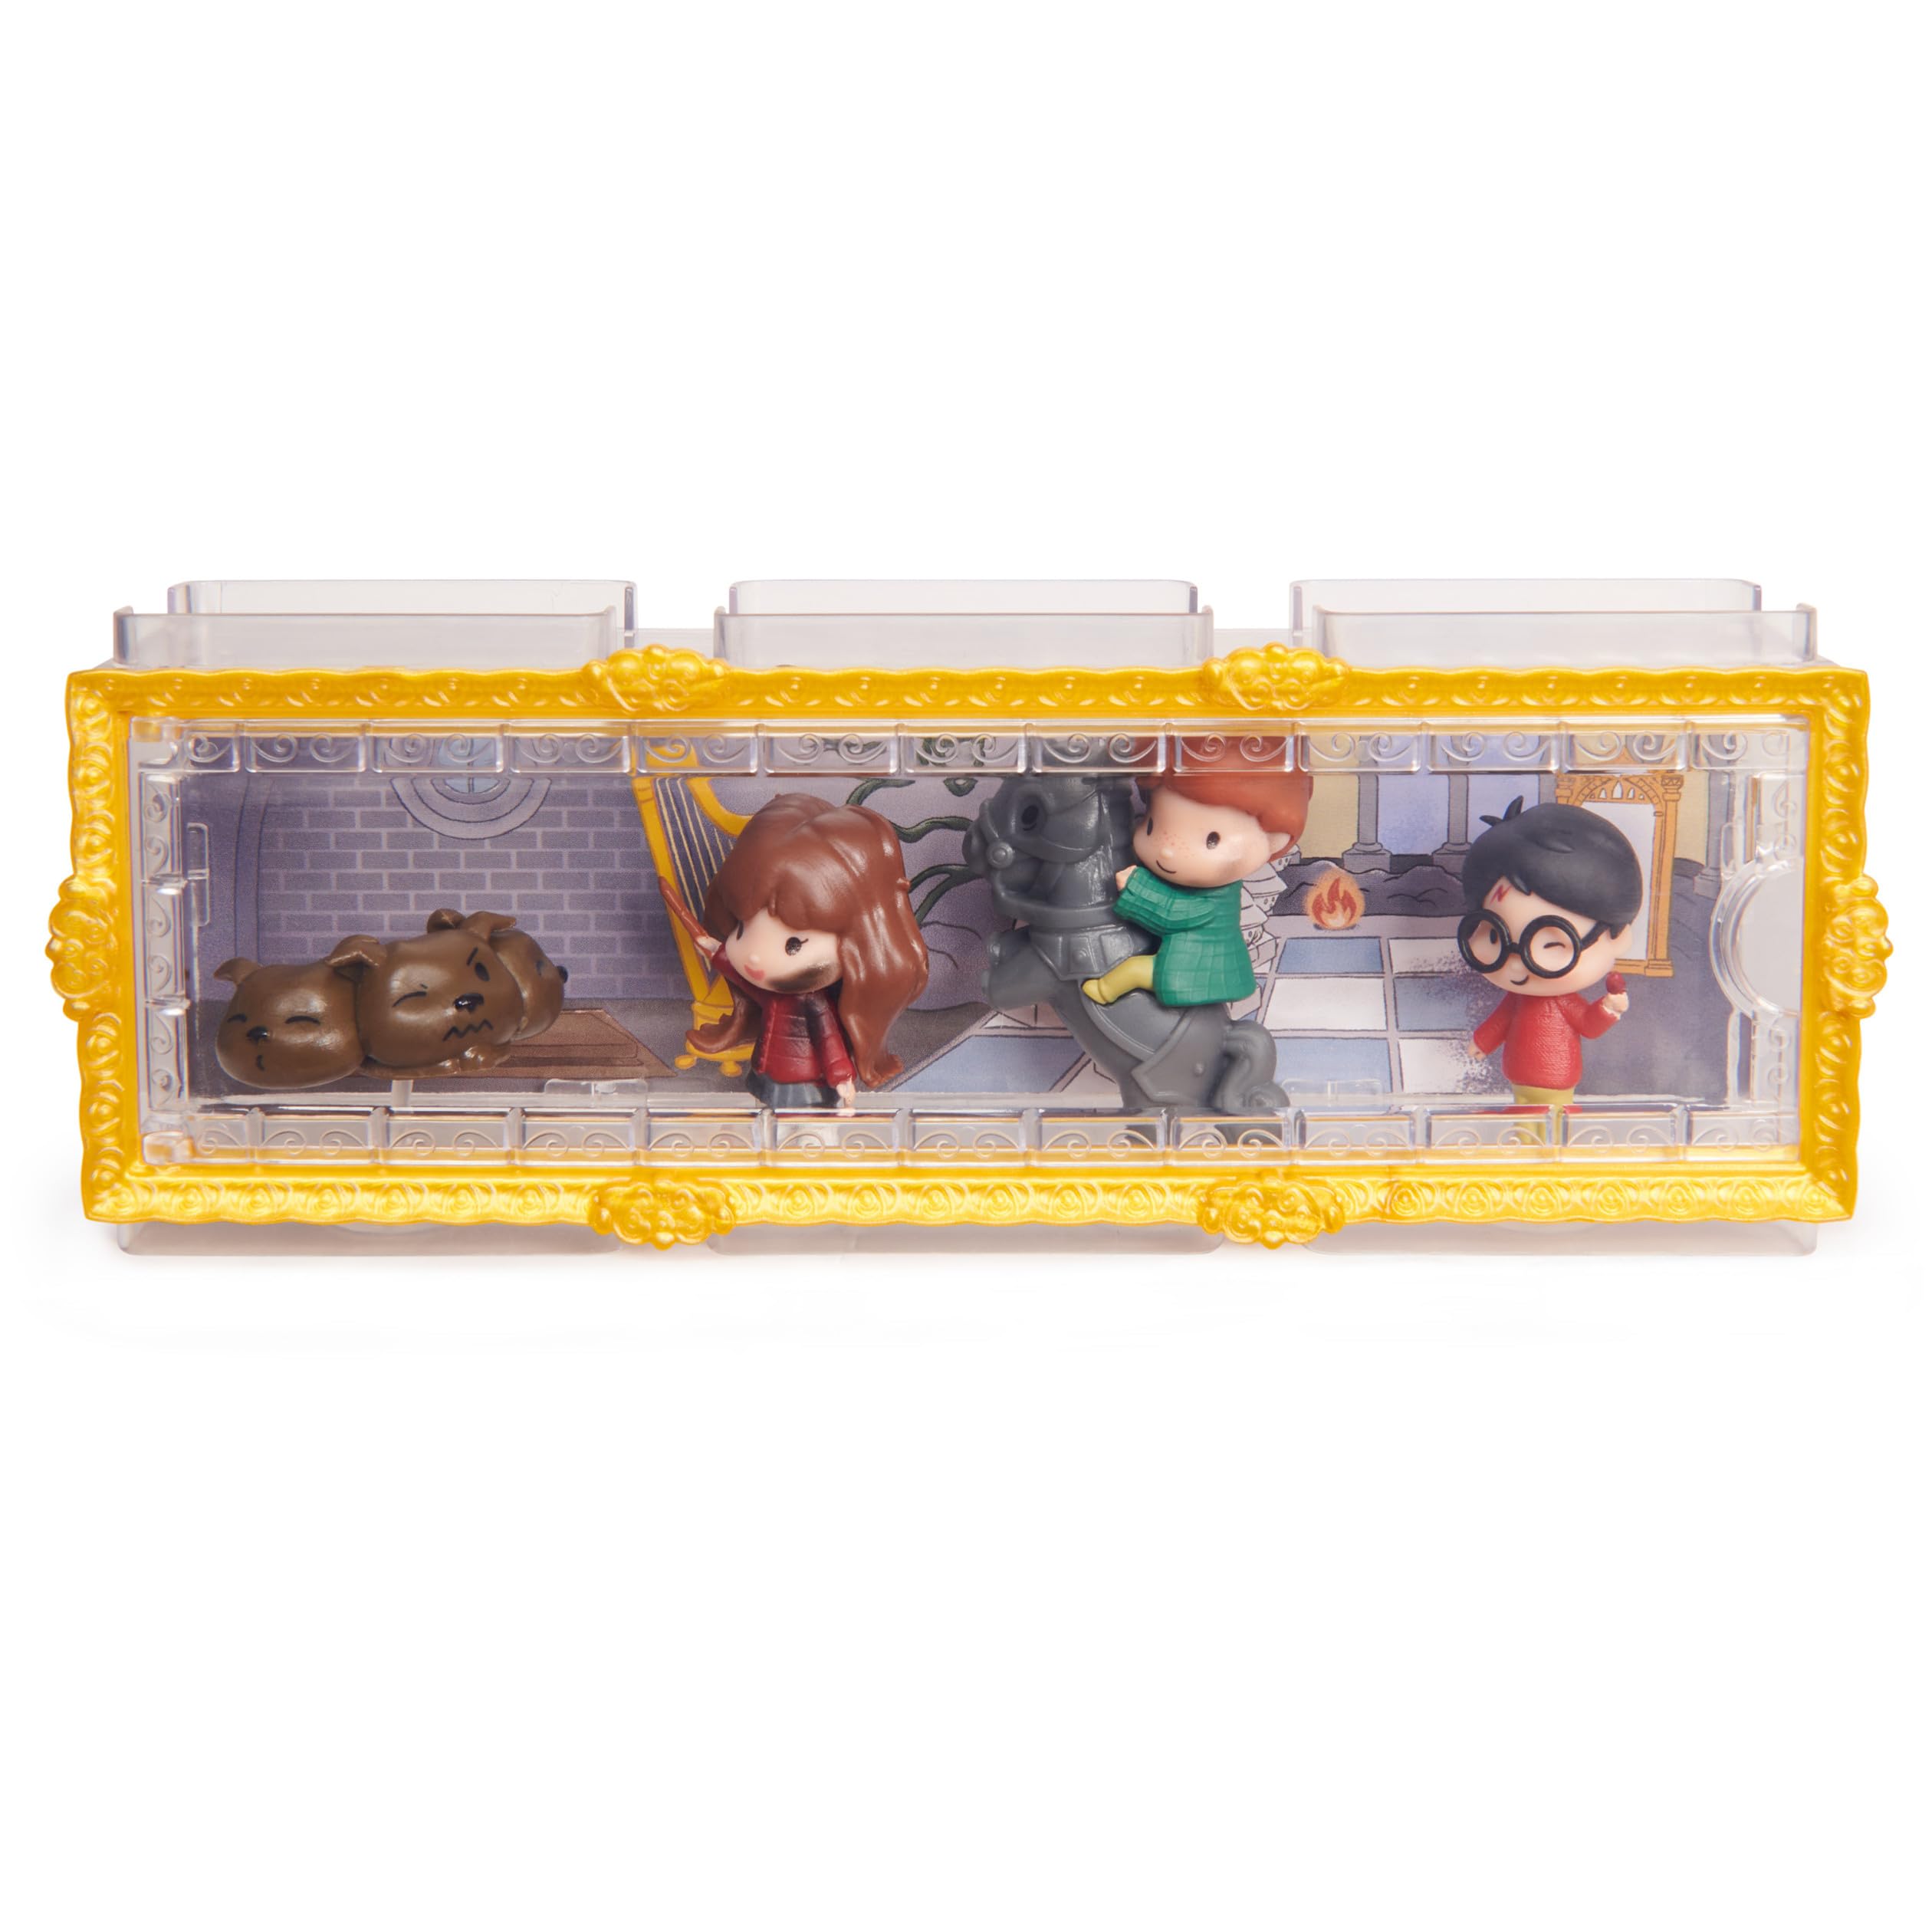 Wizarding World Harry Potter, Micro Magical Moments Scene Gift Set with Exclusive Harry, Hermione, Ron, Fluffy Figures & Display Case, Kids Toys